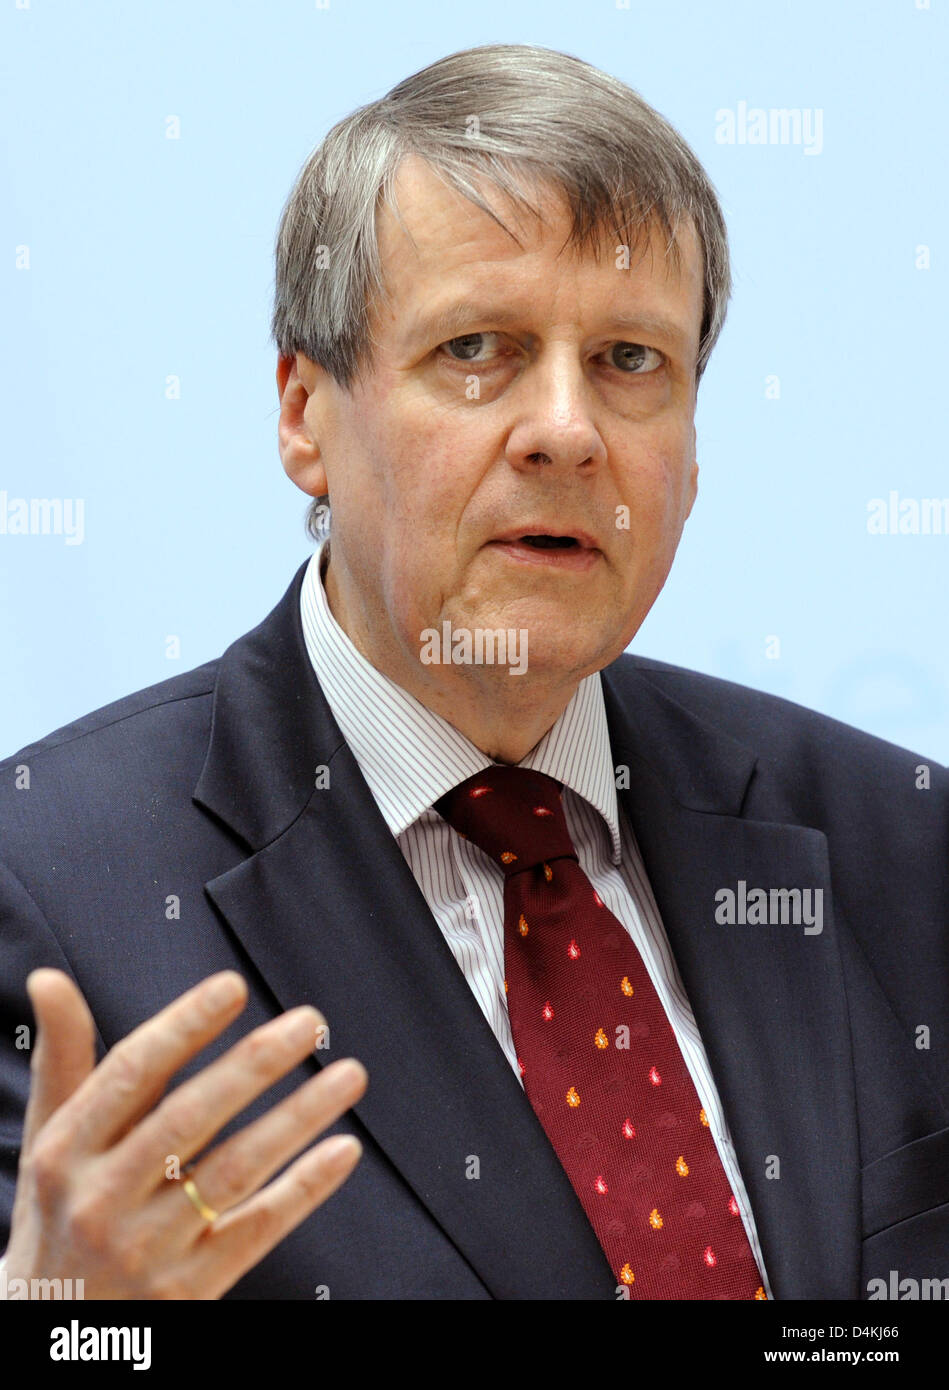 The president of the Robert Koch-Institute, Joerg Hacker, speaks at a press conference on the swine flu in Berlin, Germany, 29 April 2009. There are three confirmed cases of swine flu in Germany so far. Experts of the Health Ministry give information about the swine flu under the phone number 01805 99 66 19. Photo: RAINER JENSEN Stock Photo